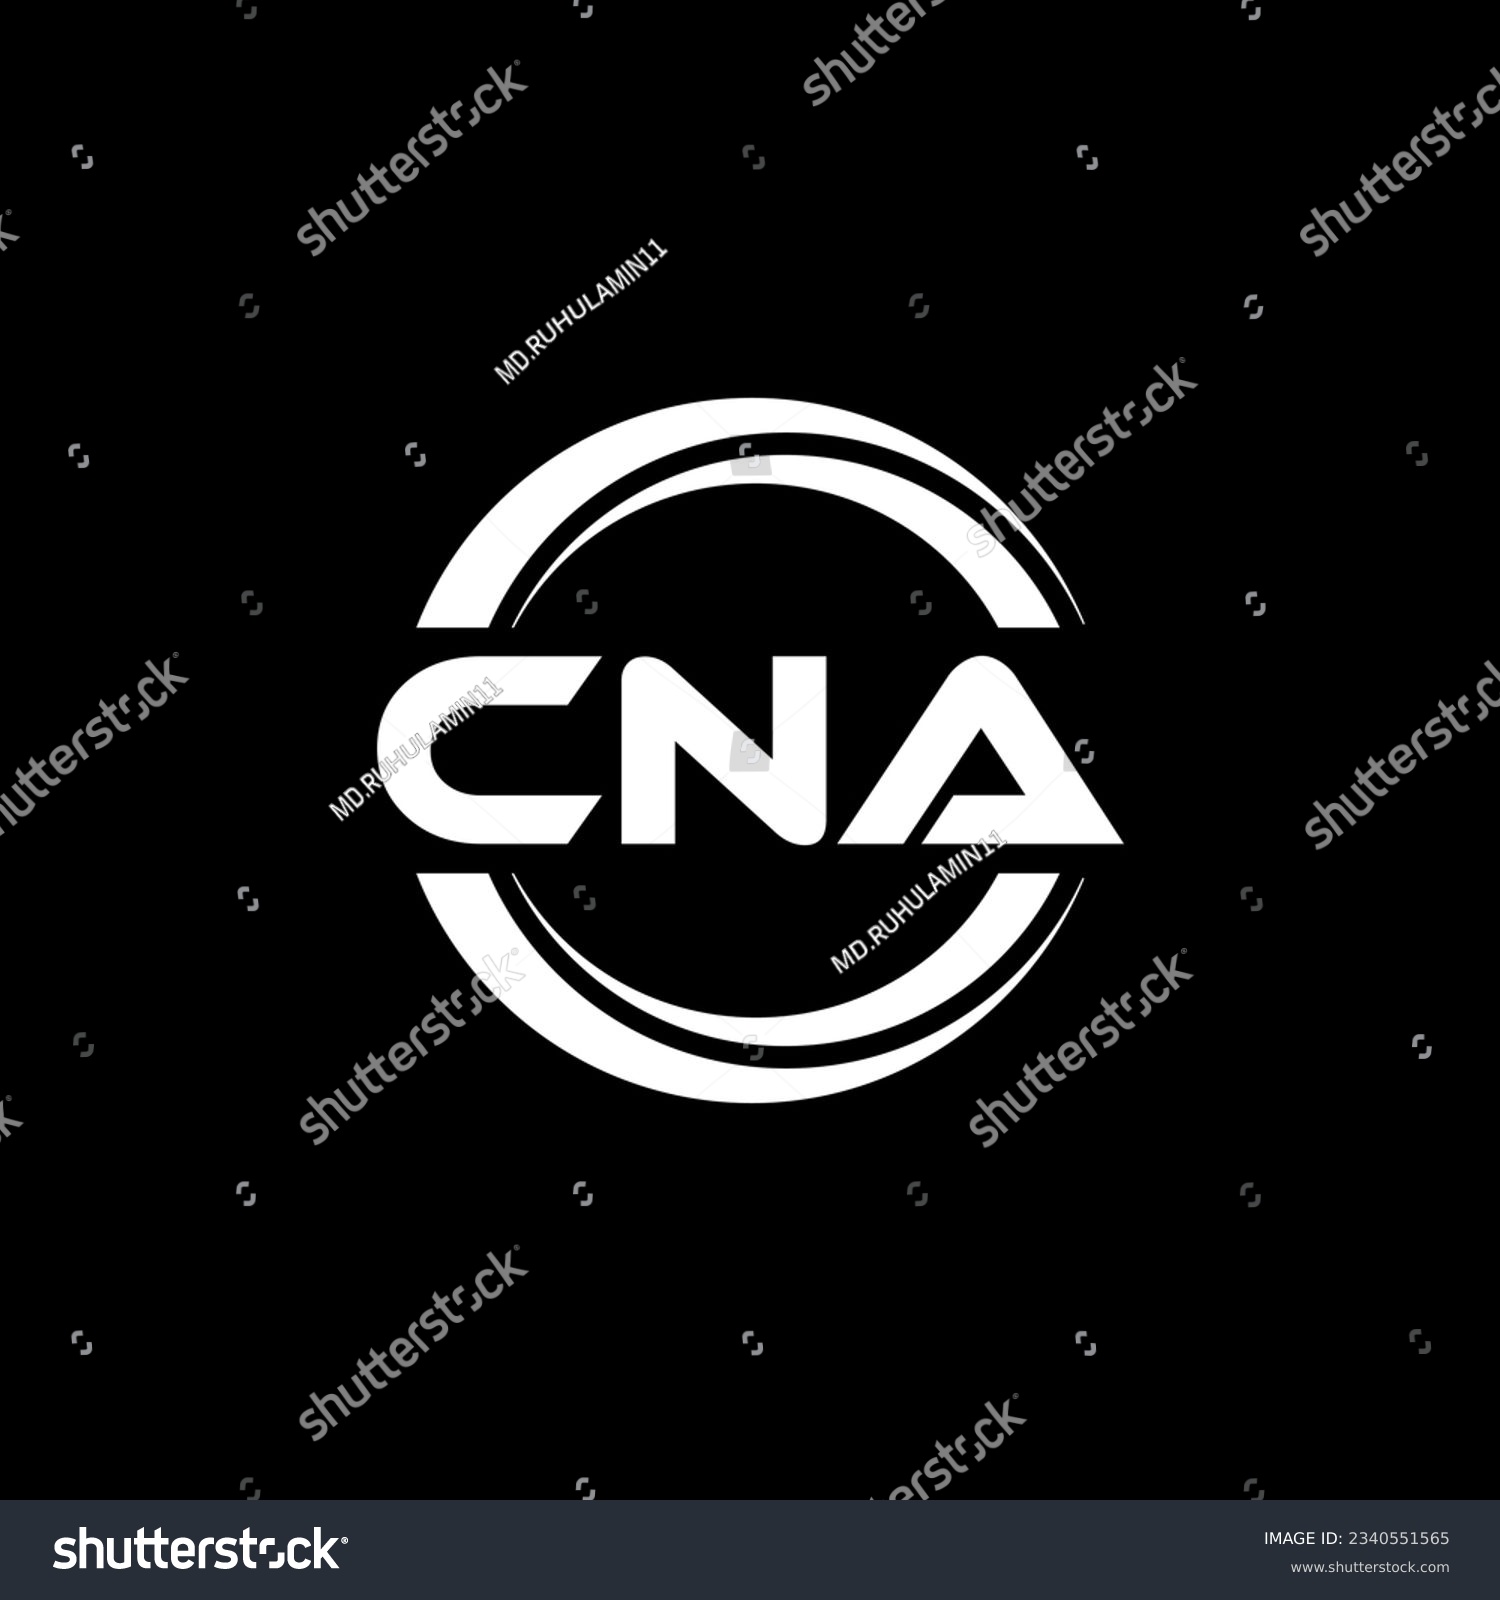 SVG of CNA Logo Design, Inspiration for a Unique Identity. Modern Elegance and Creative Design. Watermark Your Success with the Striking this Logo. svg